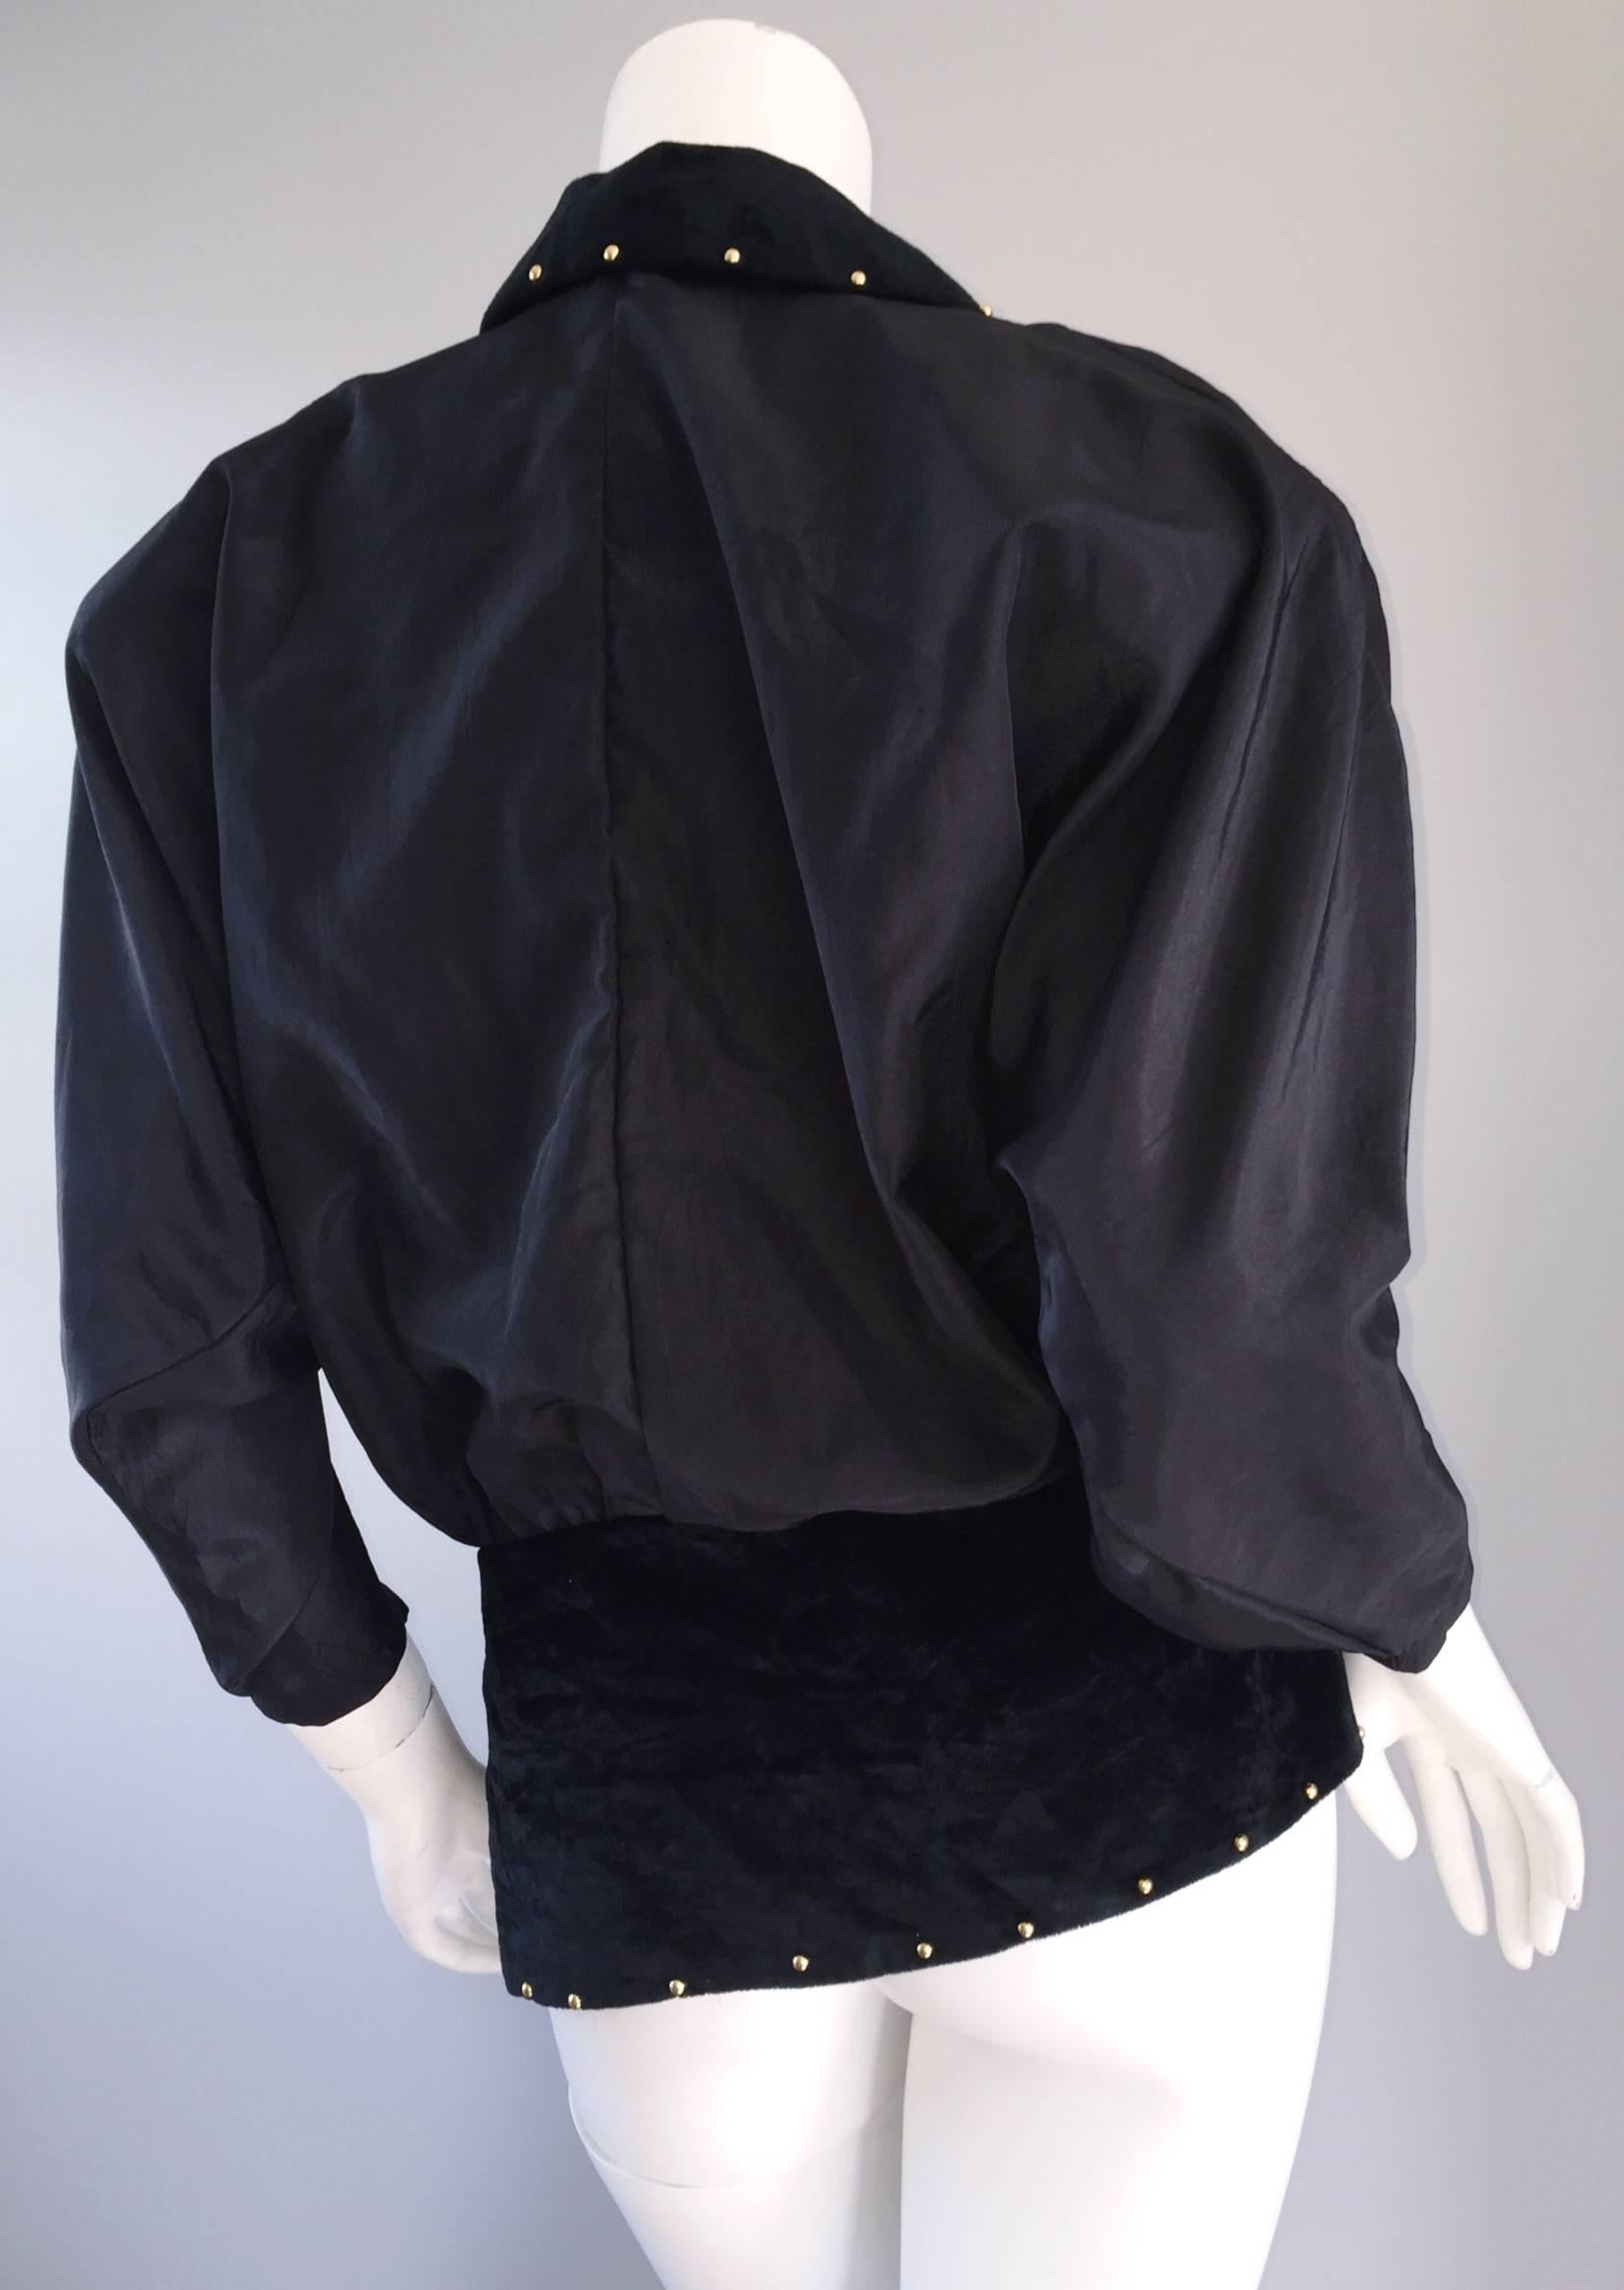 Amazing vintage Eccetera black multi-fabric blouse OR jacket! Velveteen, mixed with silk dolman sleeves, and laser-cut crepe. Gold studs throughout, with clear beads sporadically placed. Brass zipper details at shoulders, down the bodice. Shoulder